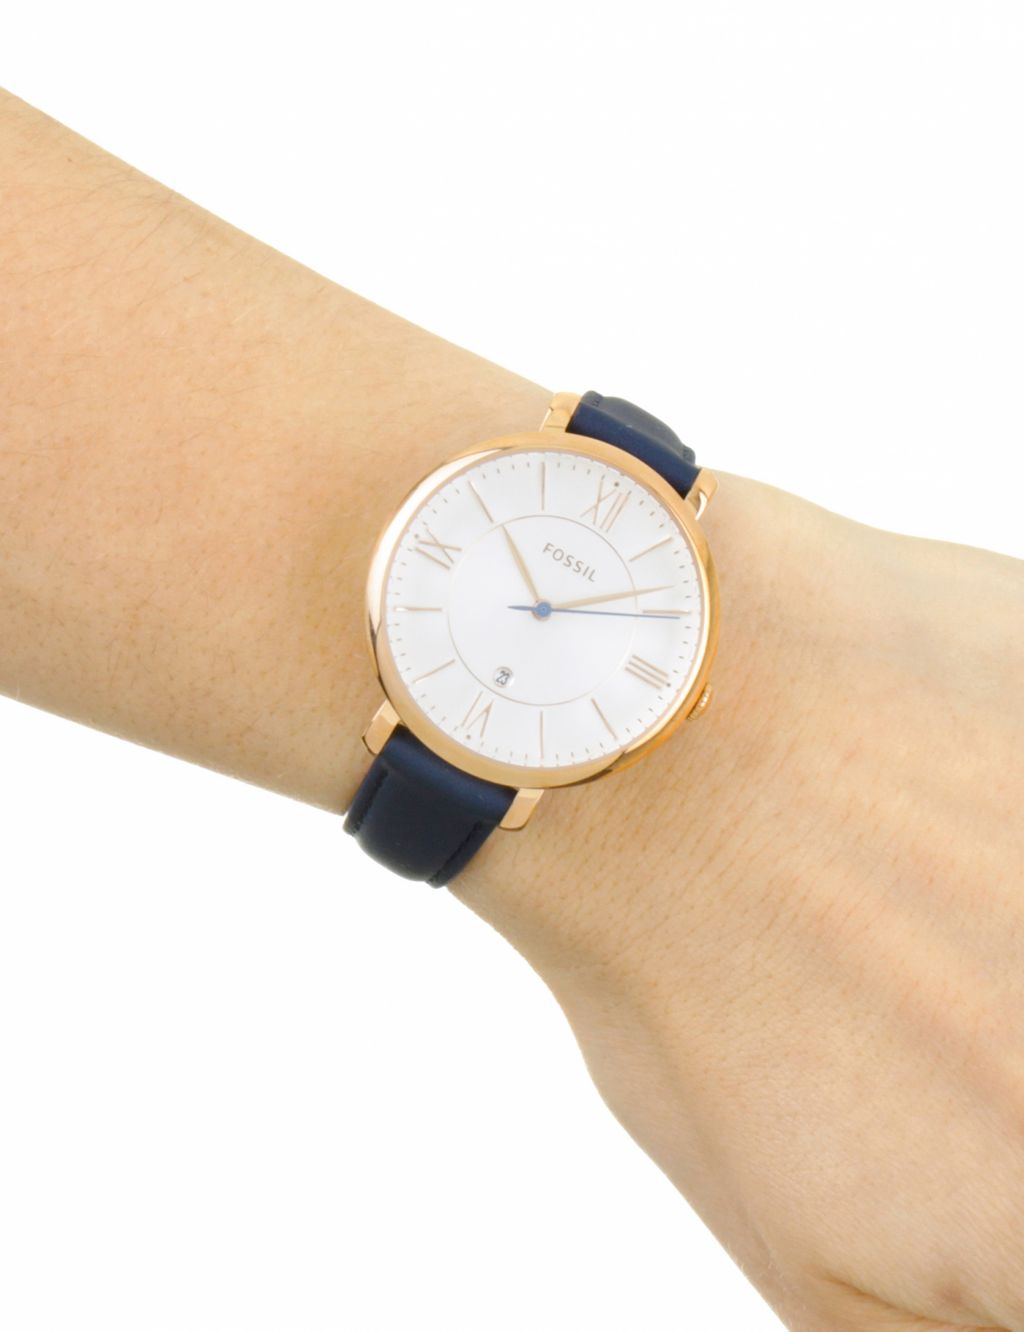 Fossil Jacqueline Navy Leather Watch image 4